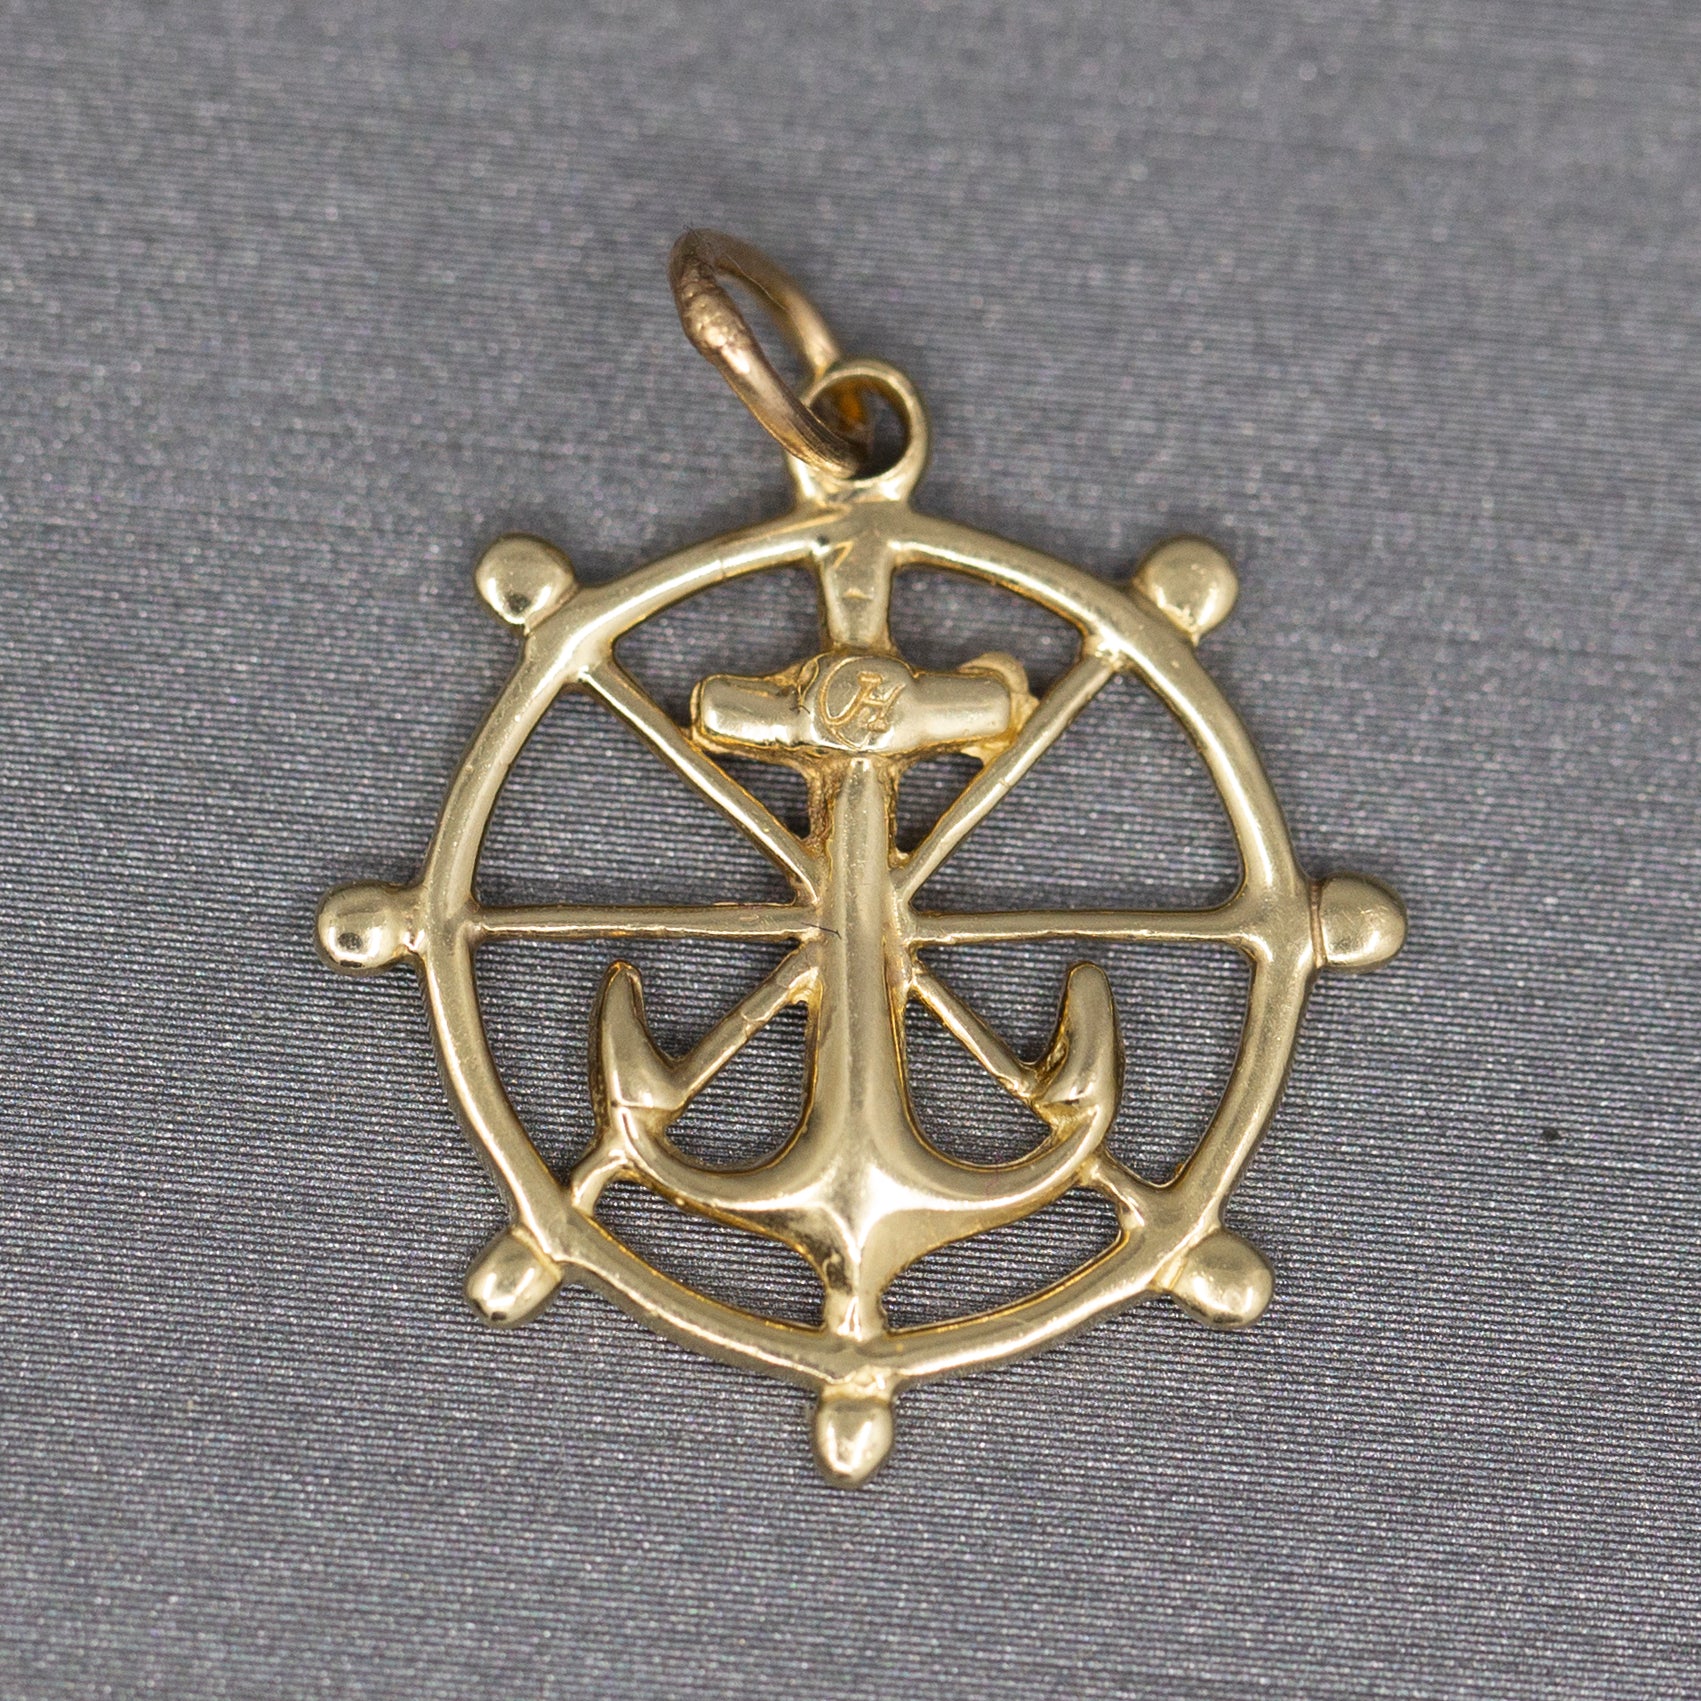 Vintage Anchor and Ship's Wheel Pendant Charm in 14k Yellow Gold